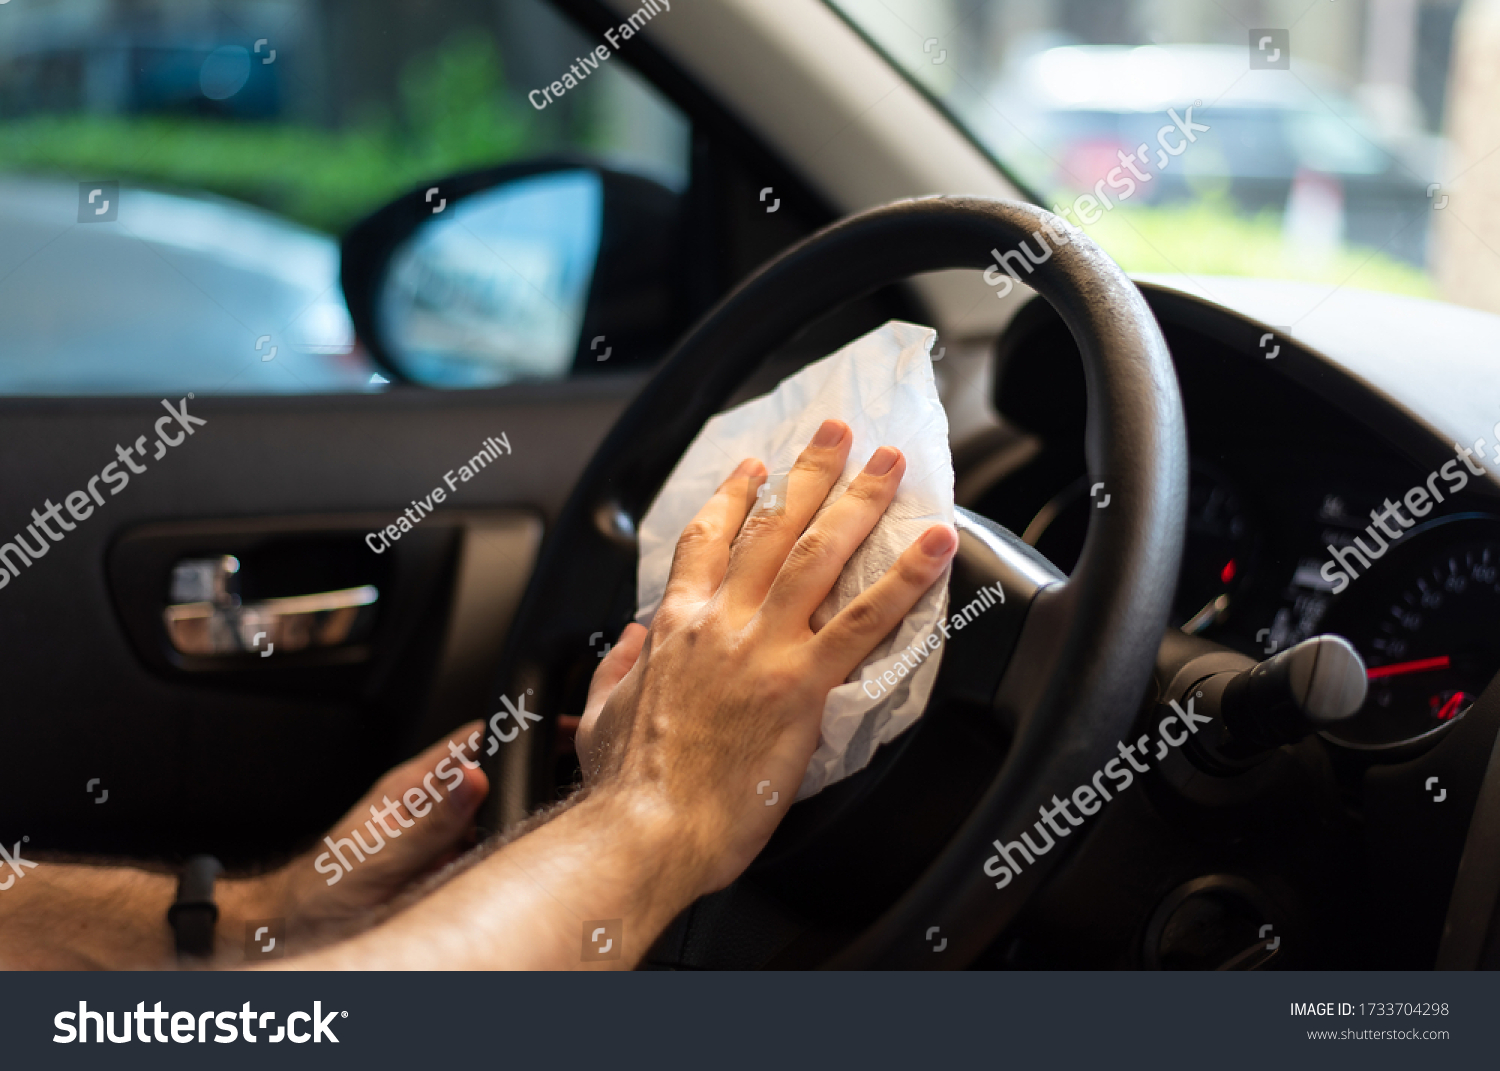 Man cleaning his car steering wheel for disinfection and a safe ride during the virus pandemic closeup